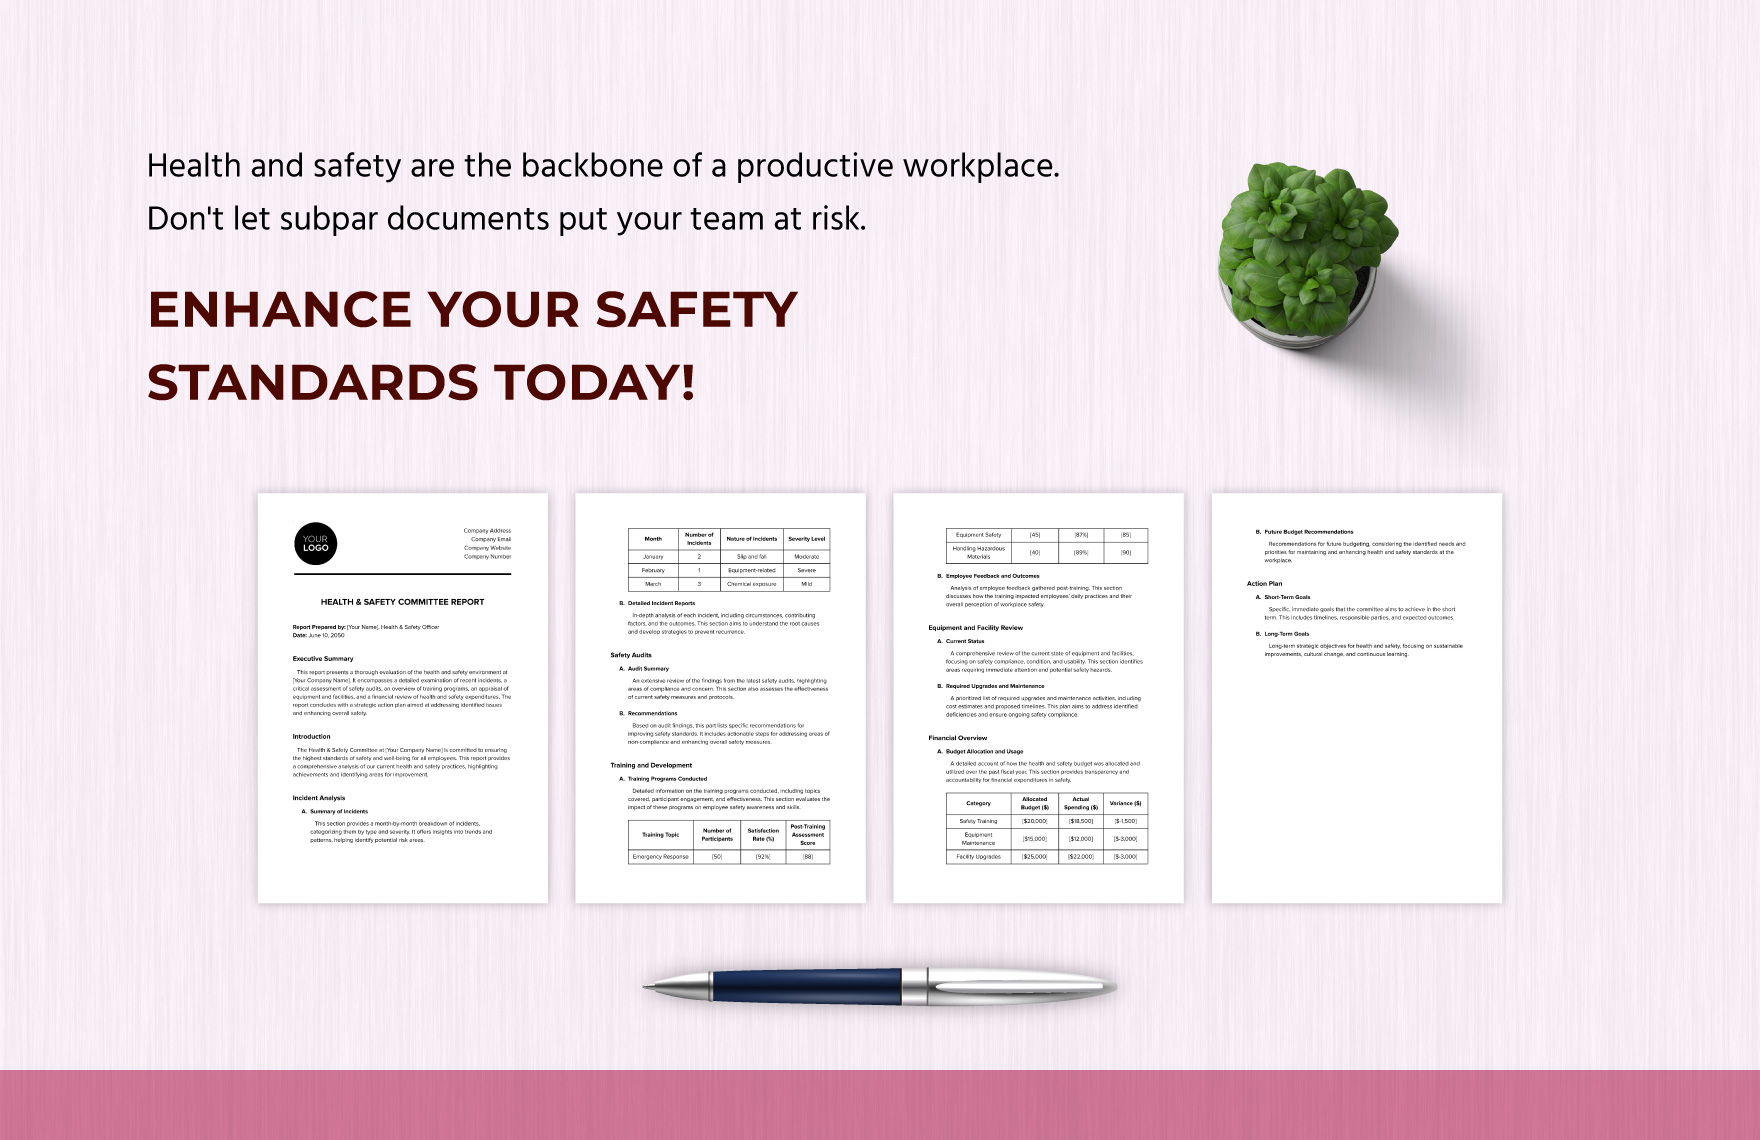 Health & Safety Committee Report Template